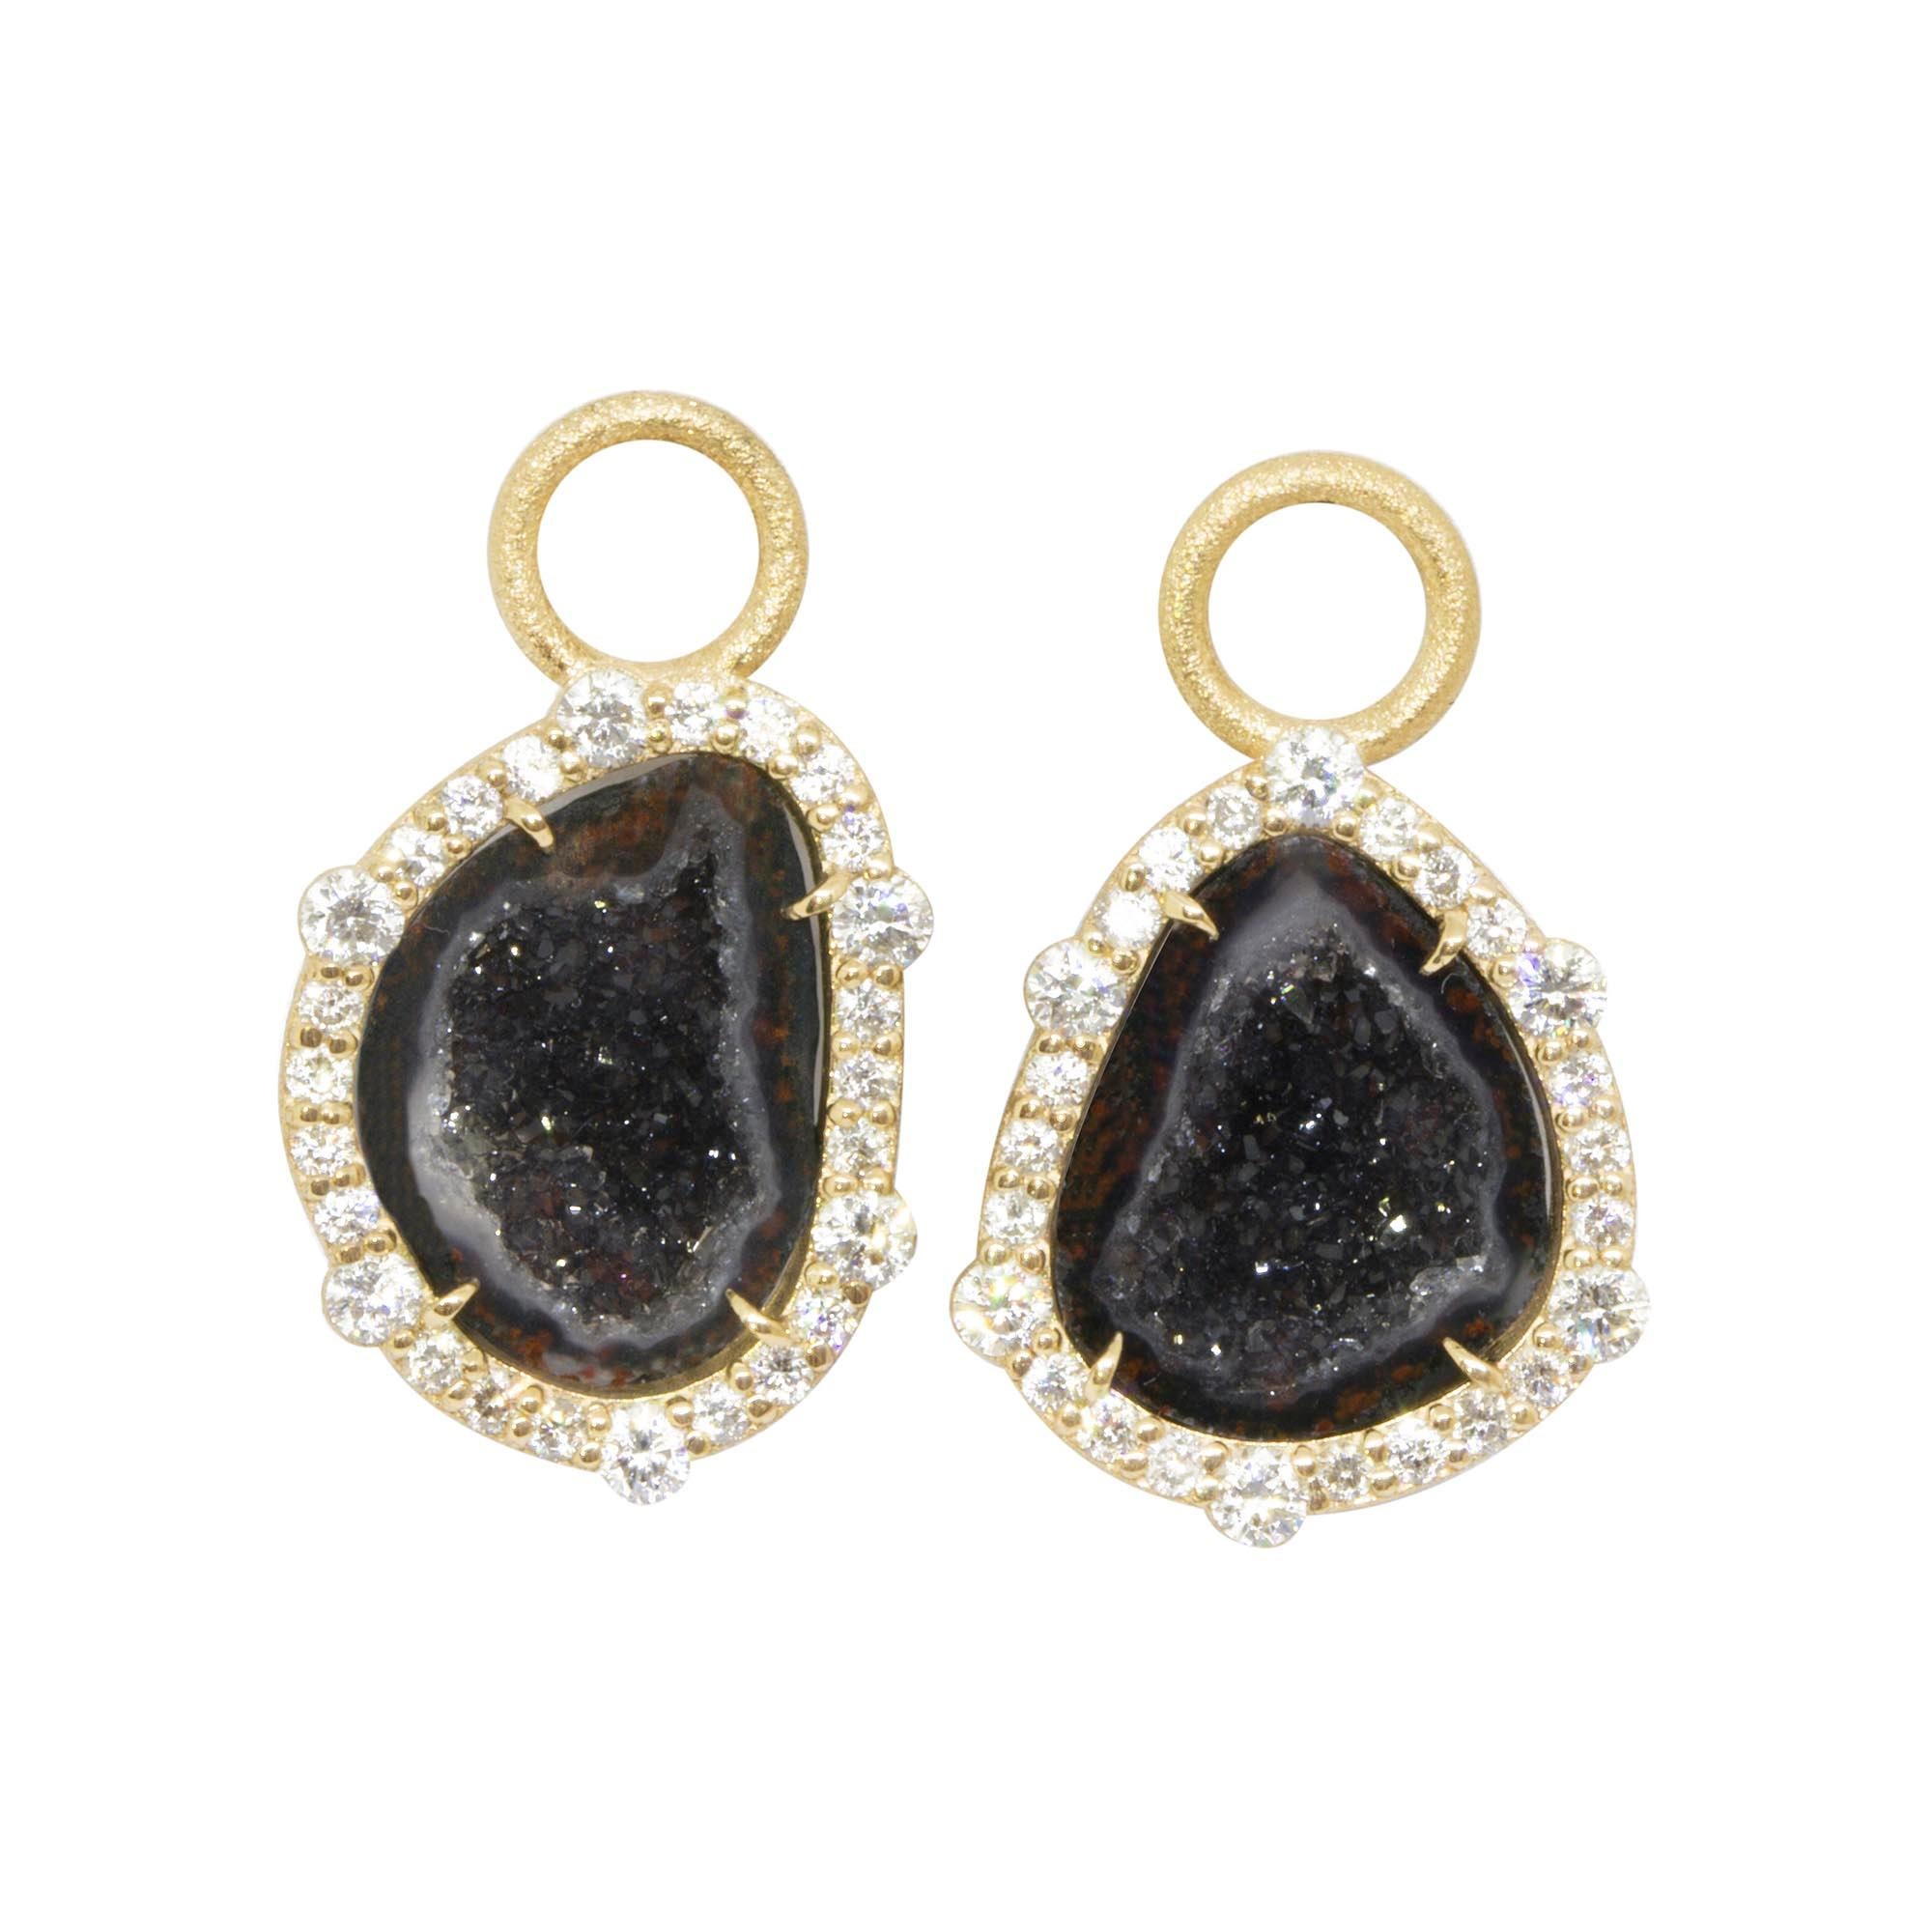 Brilliant Cut Geode Charms and Intricate 18 Karat Gold Reversible Huggies Earrings For Sale